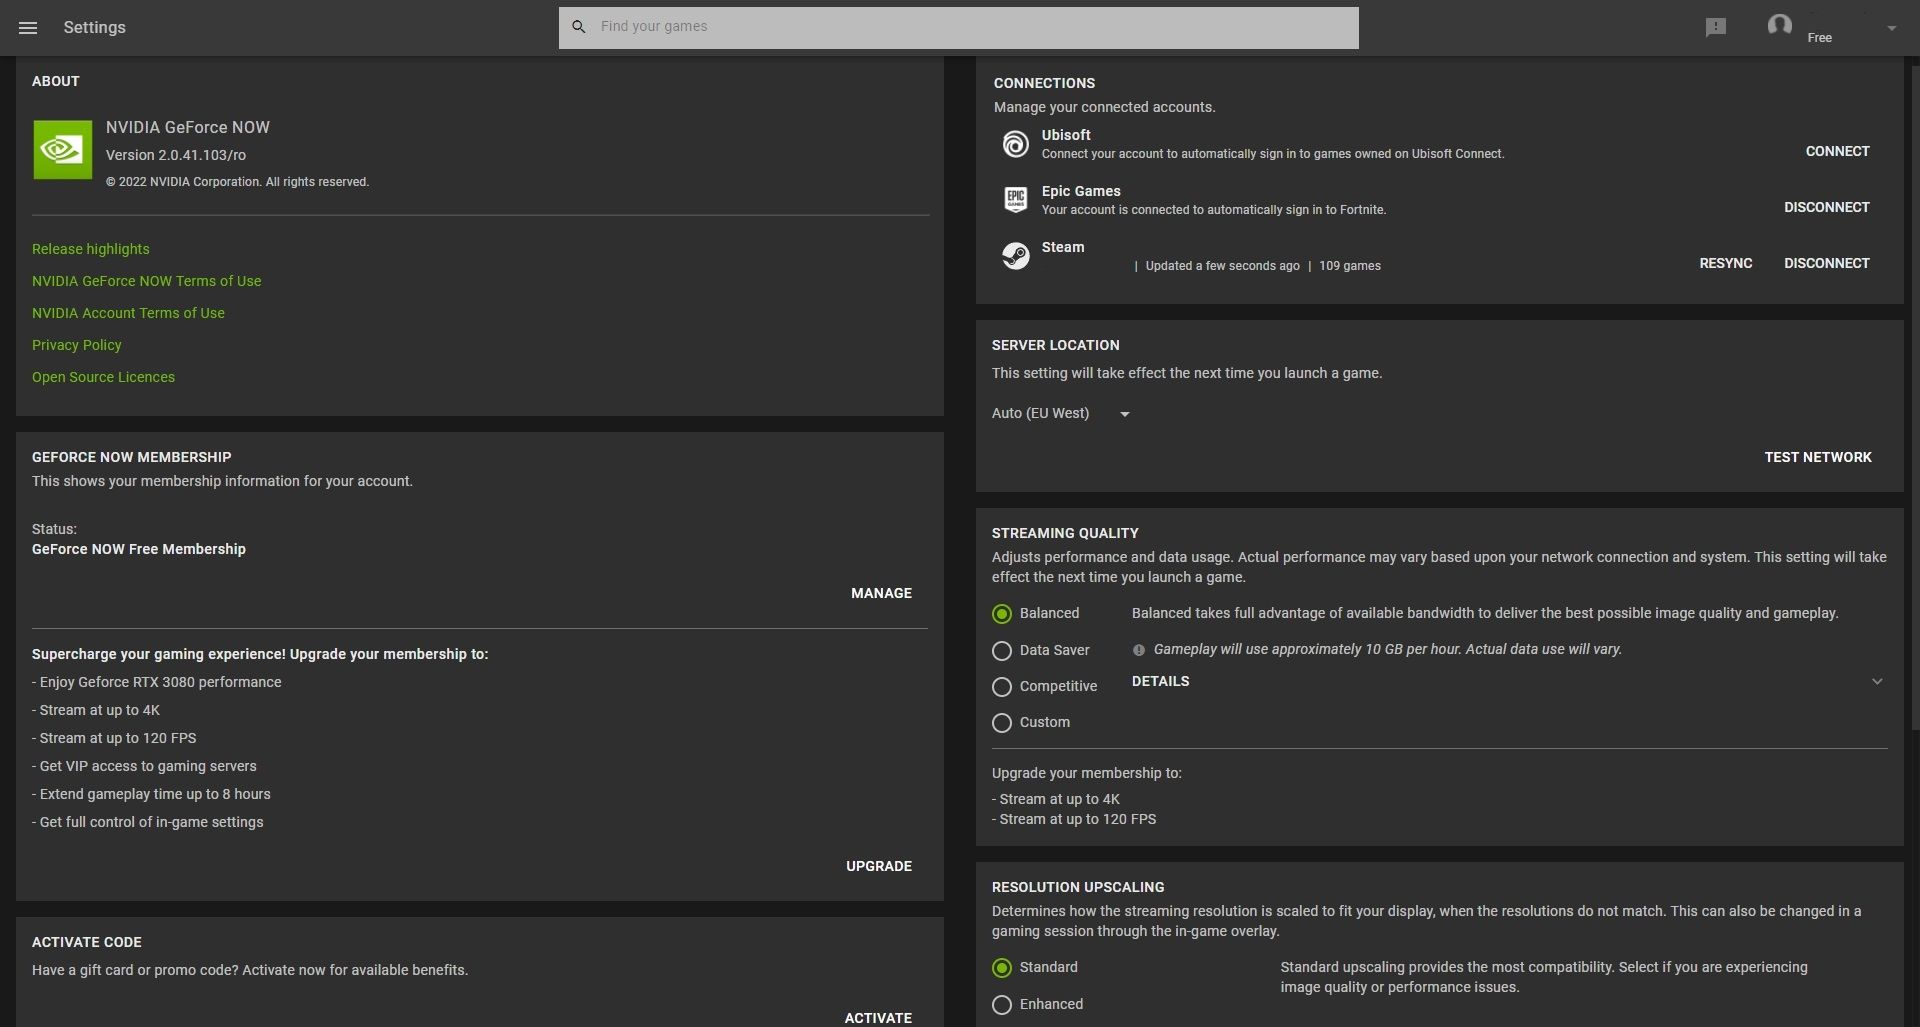 nvidia geforce now settings page